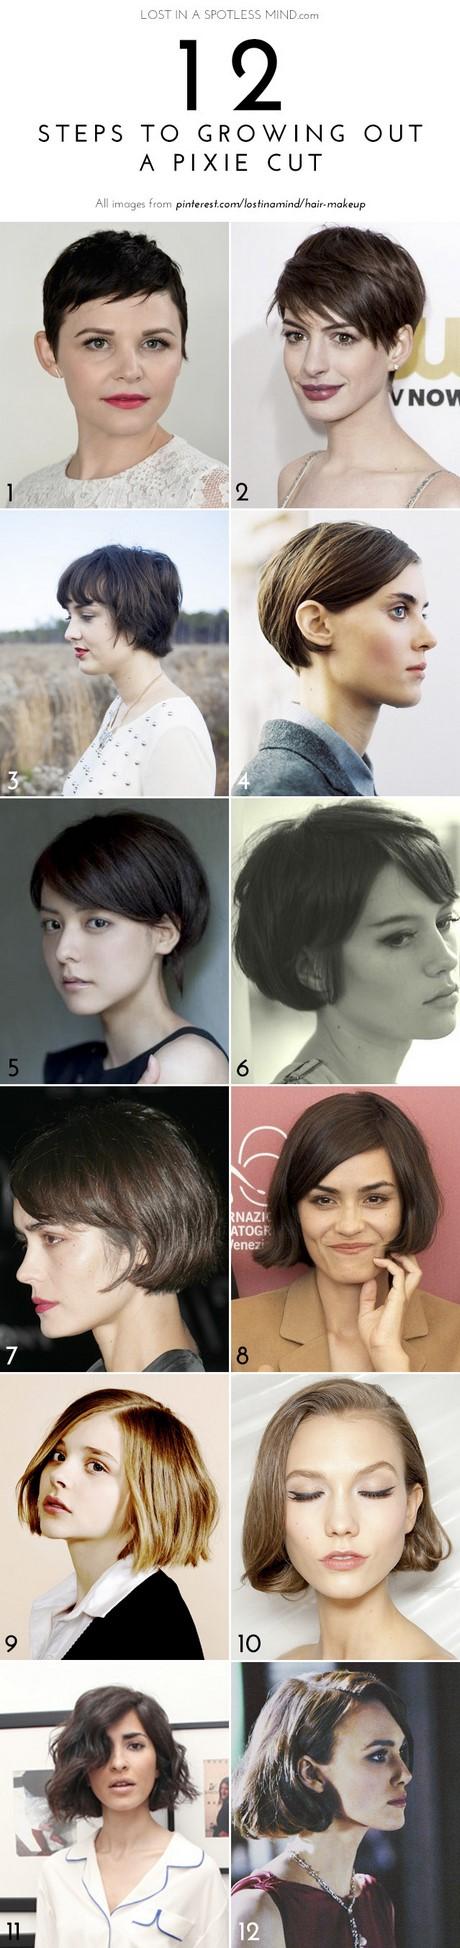 Growing hair from pixie cut growing-hair-from-pixie-cut-01_15